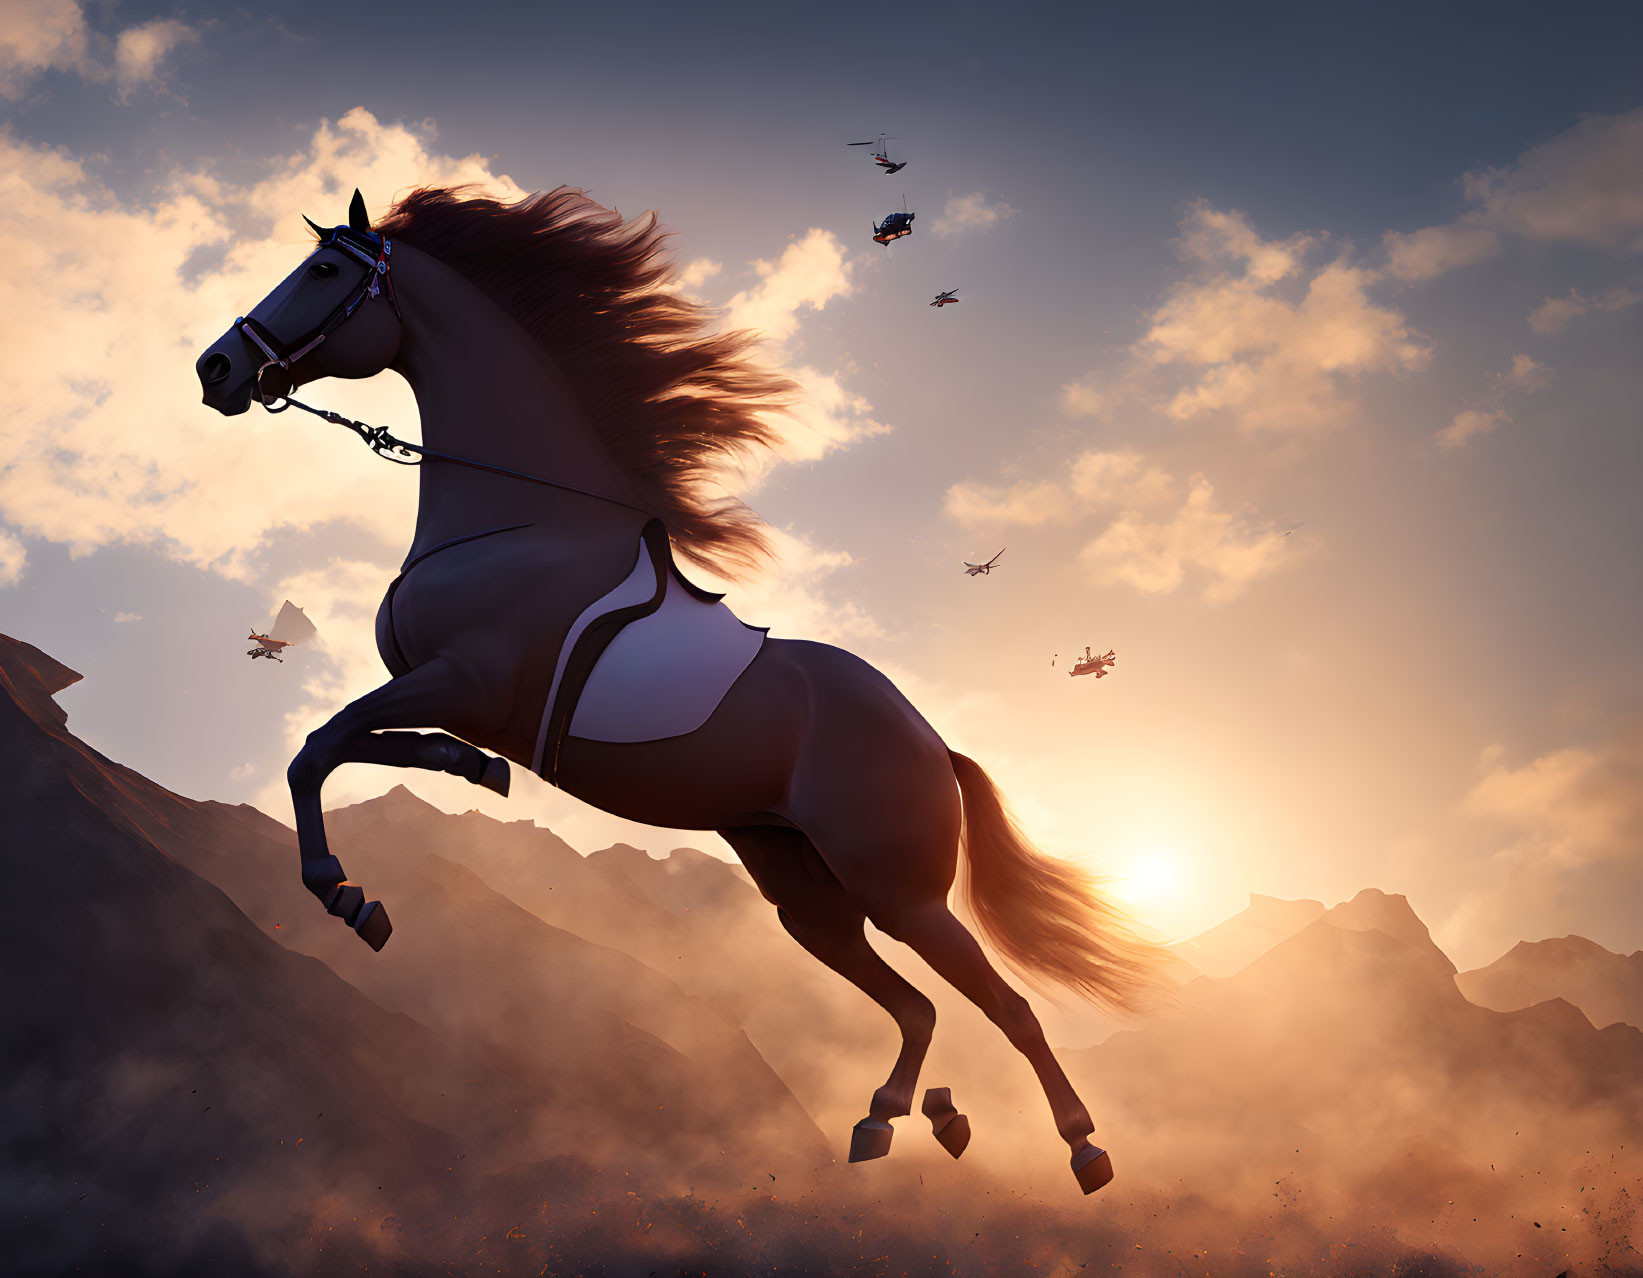 Majestic horse with flowing mane leaps in dusky sky against golden sunset